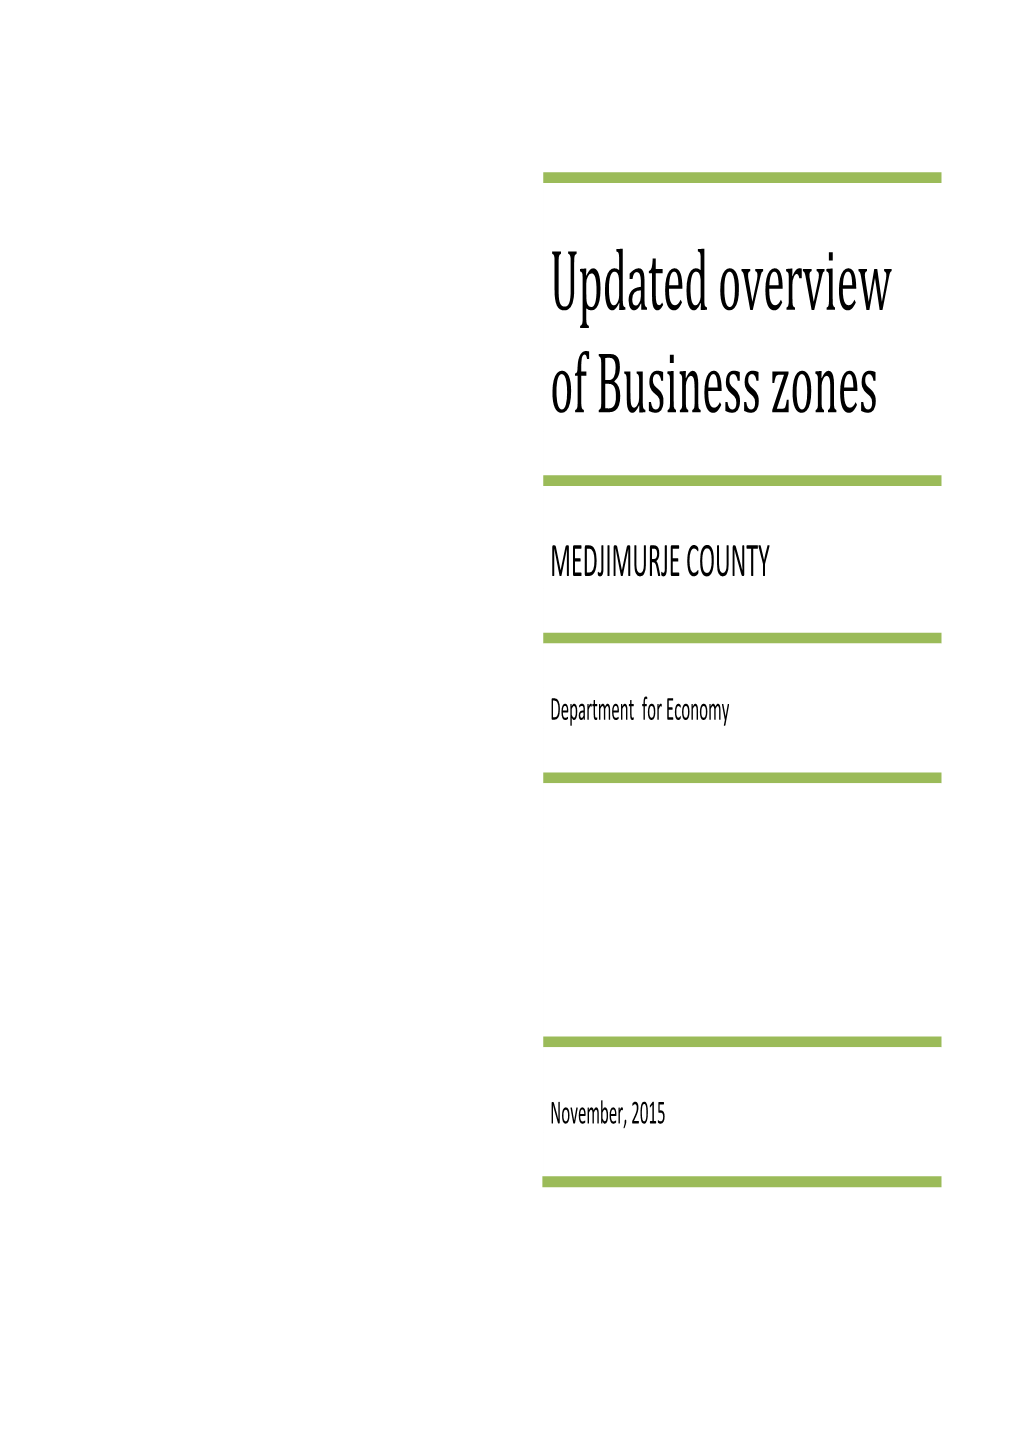 Updated Overview of Business Zones